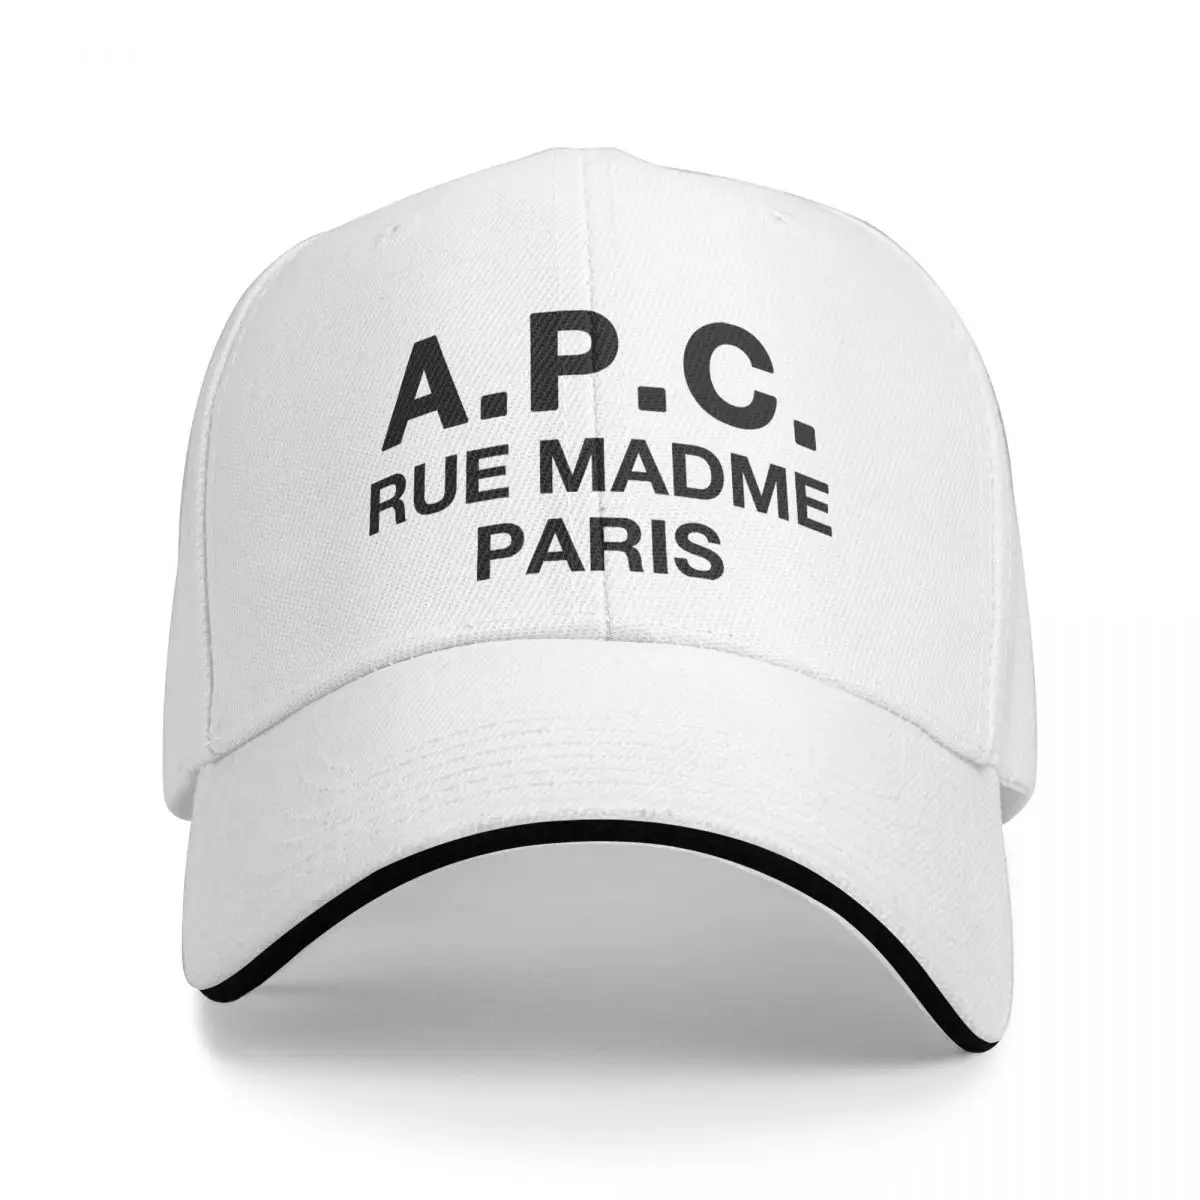 

APC Brand Letter Printed Trucker Hat Merch Vintage Snapback Hat For Unisex Style Casquette Fit All Size